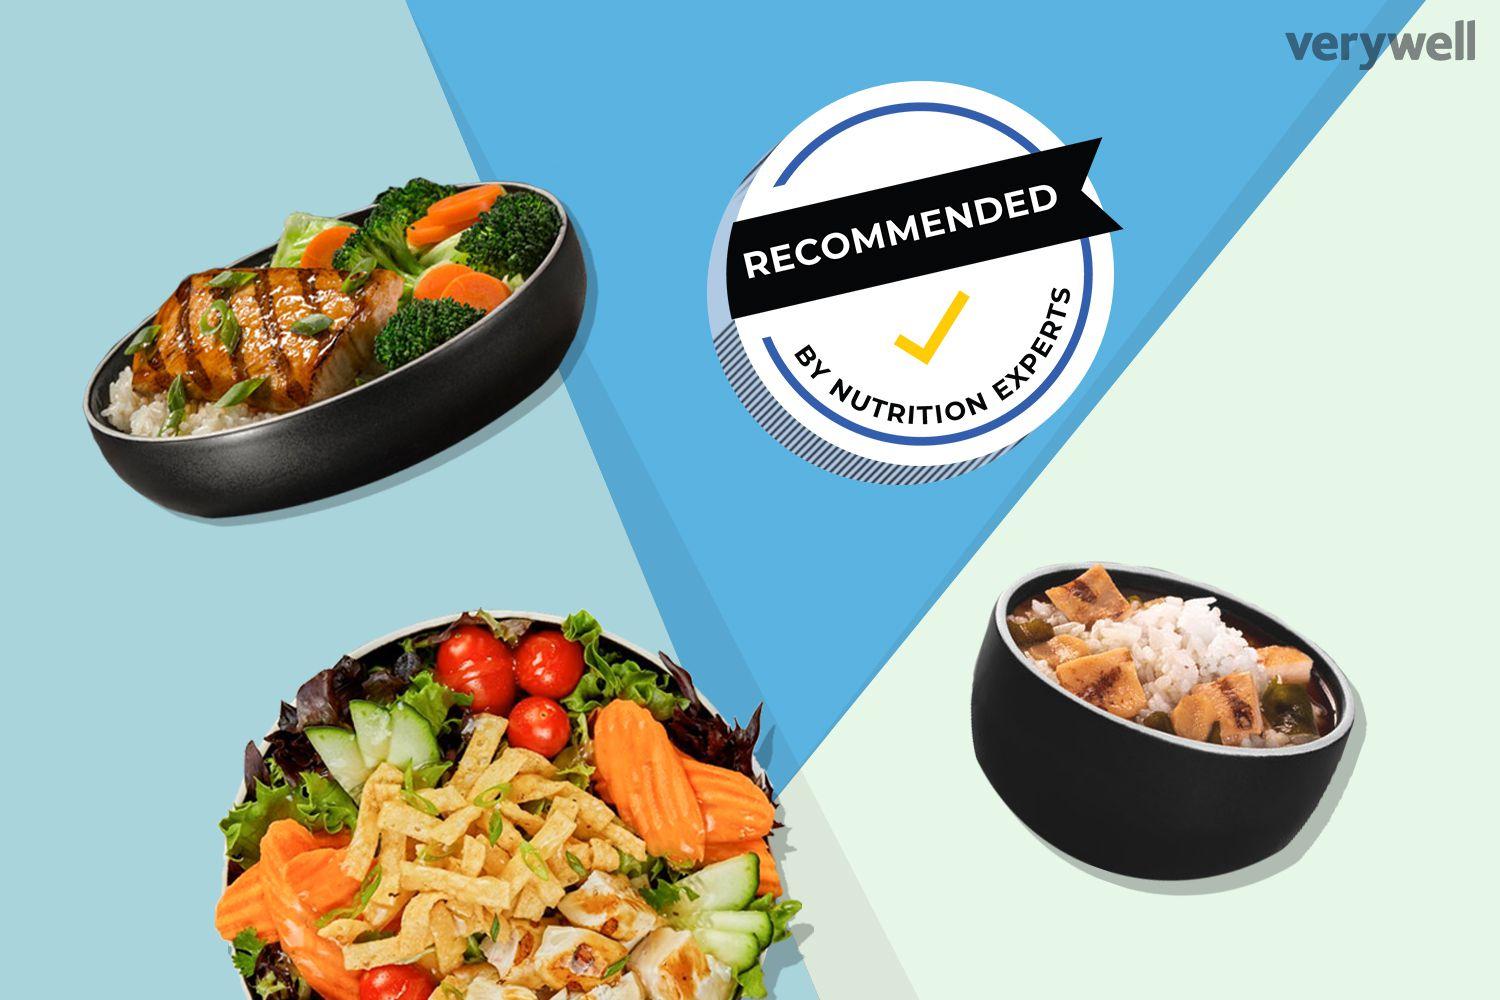 Waba Grill Salad Compositions, Price, How to order